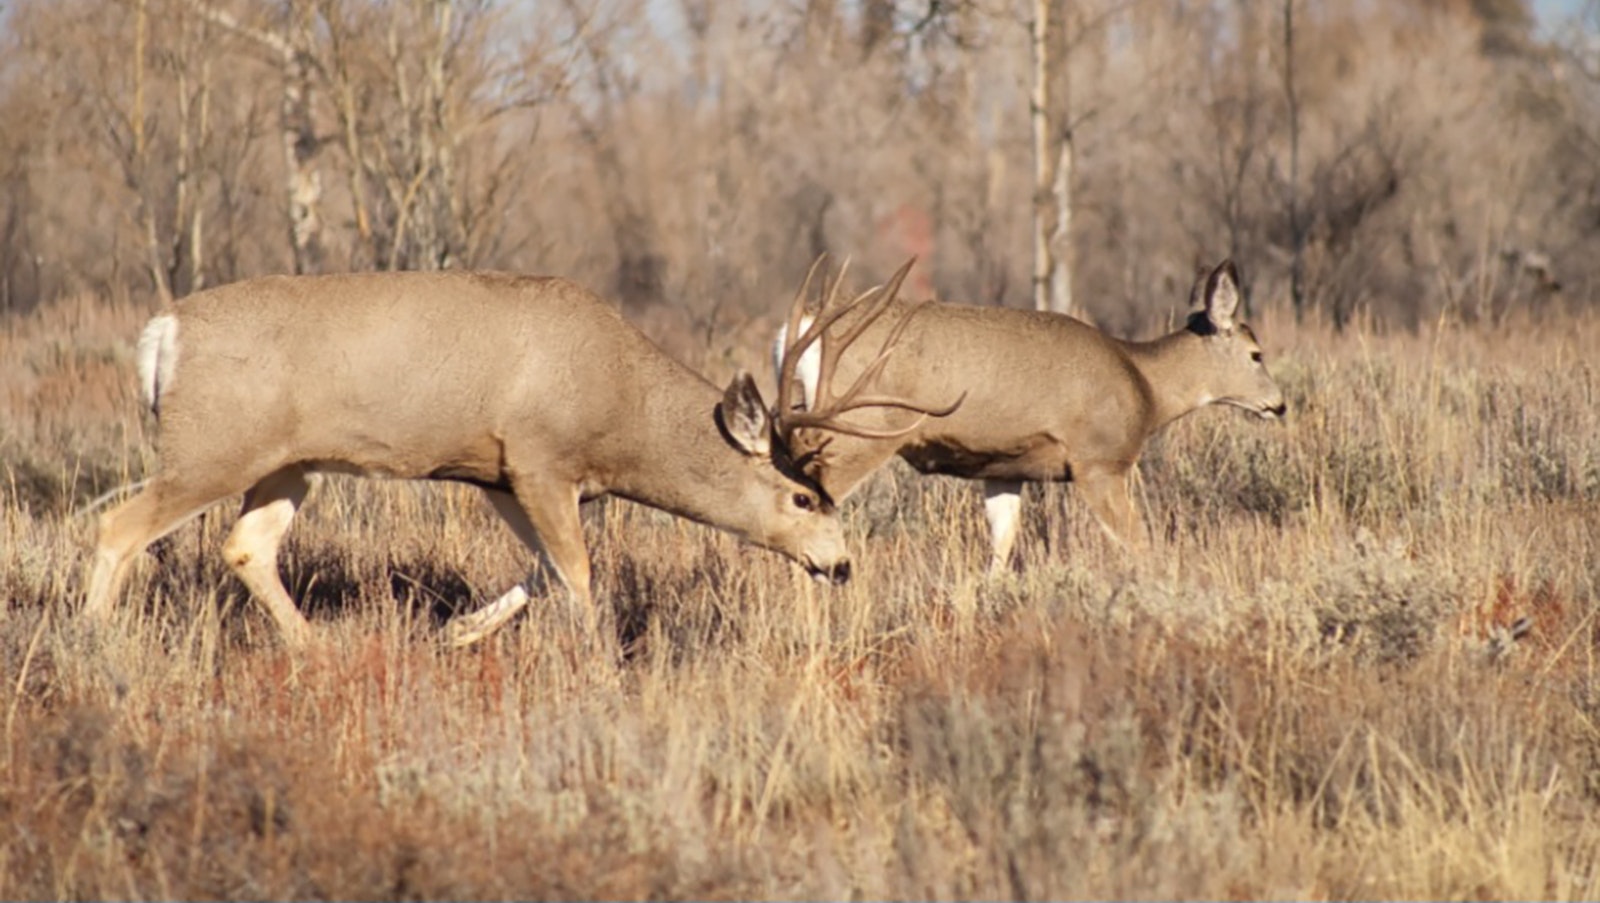 The Greater Little Mountain area is prime mule deer habitat and worth protecting from development, wildlife conservationists say.